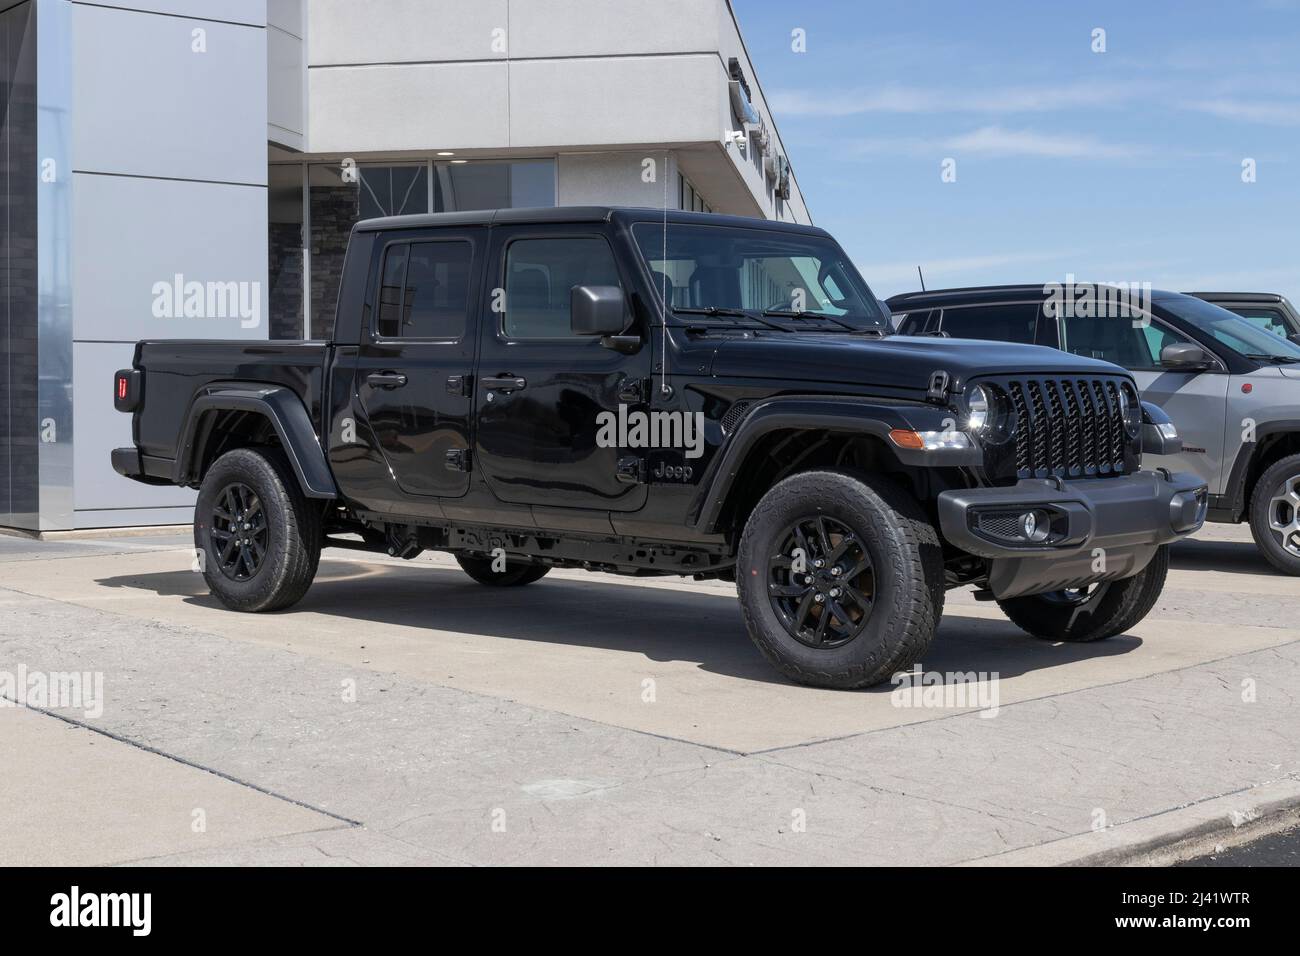 Kokomo - Circa April 2022: Jeep Gladiator display at a Stellantis dealer. The Jeep Gladiator models include the Sport, Willys, Rubicon and Mojave. Stock Photo